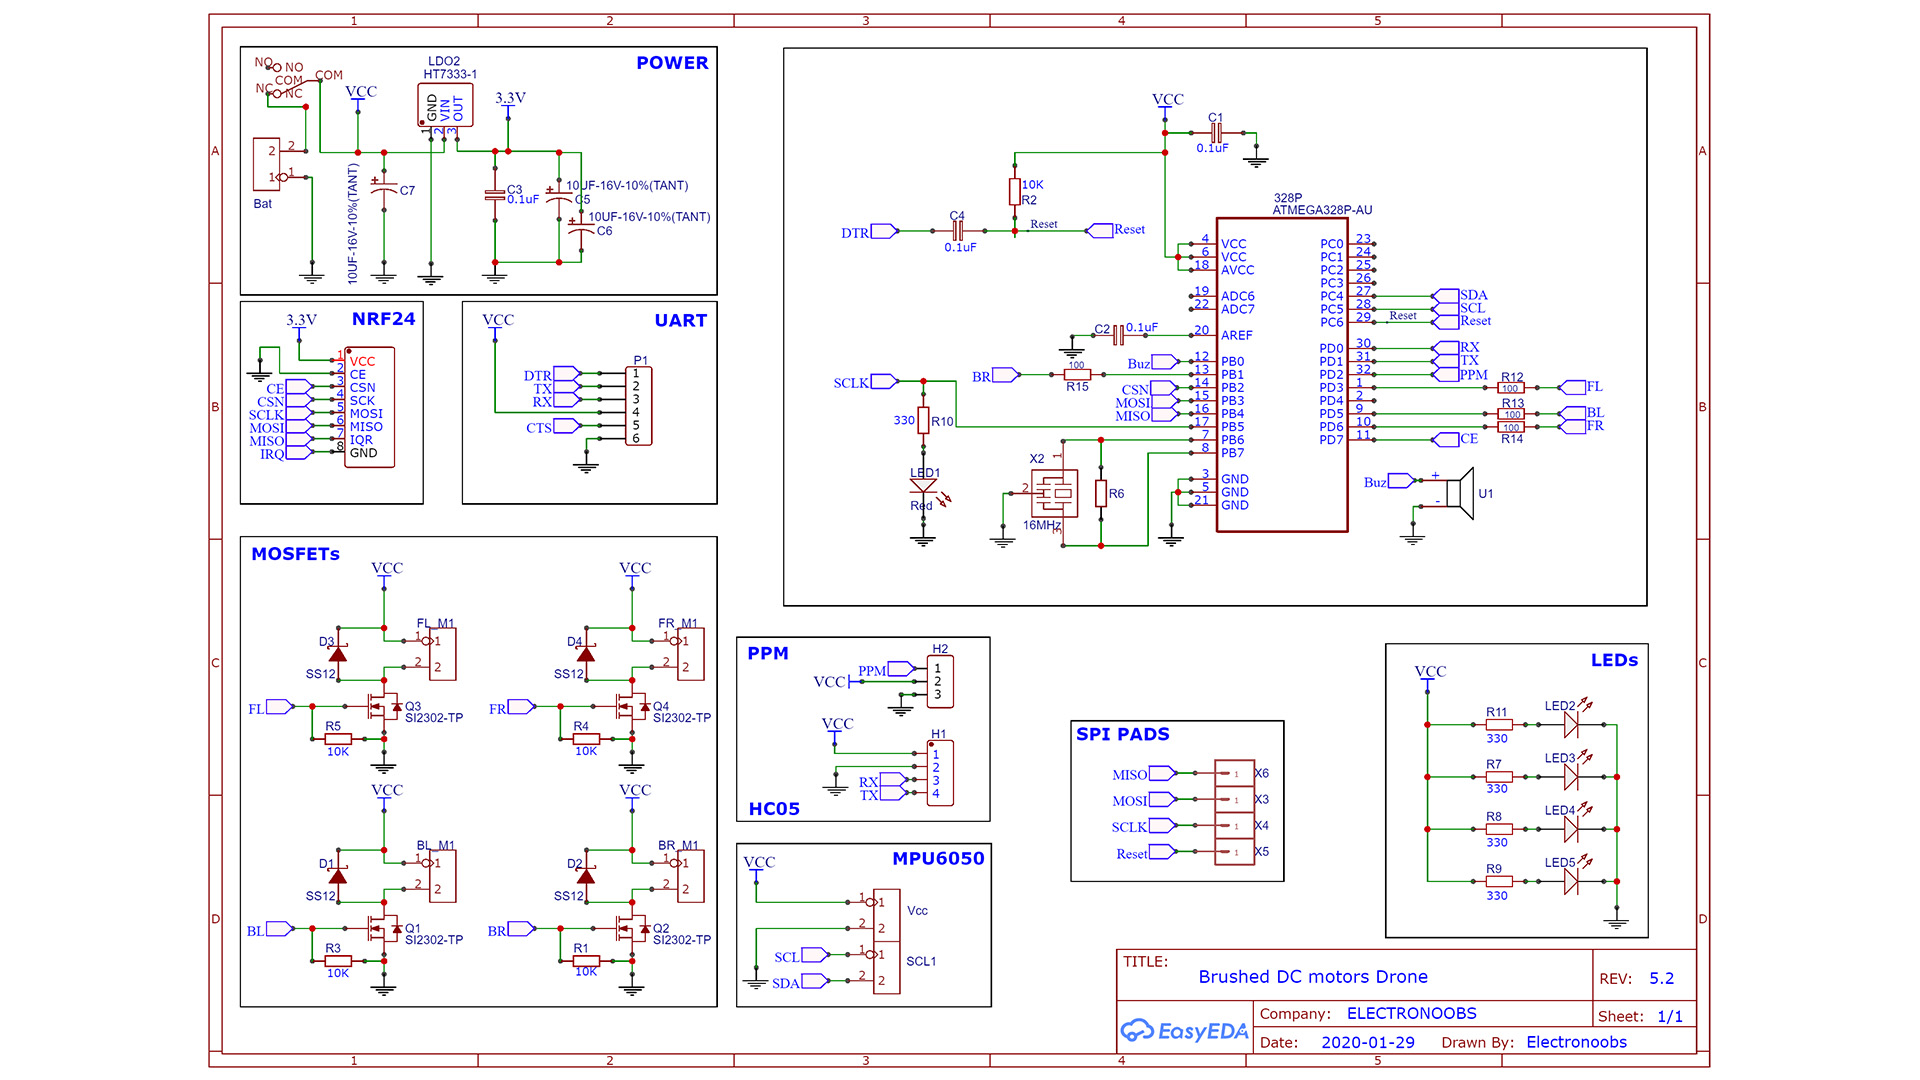 Arduino schematic brushed drone PCB